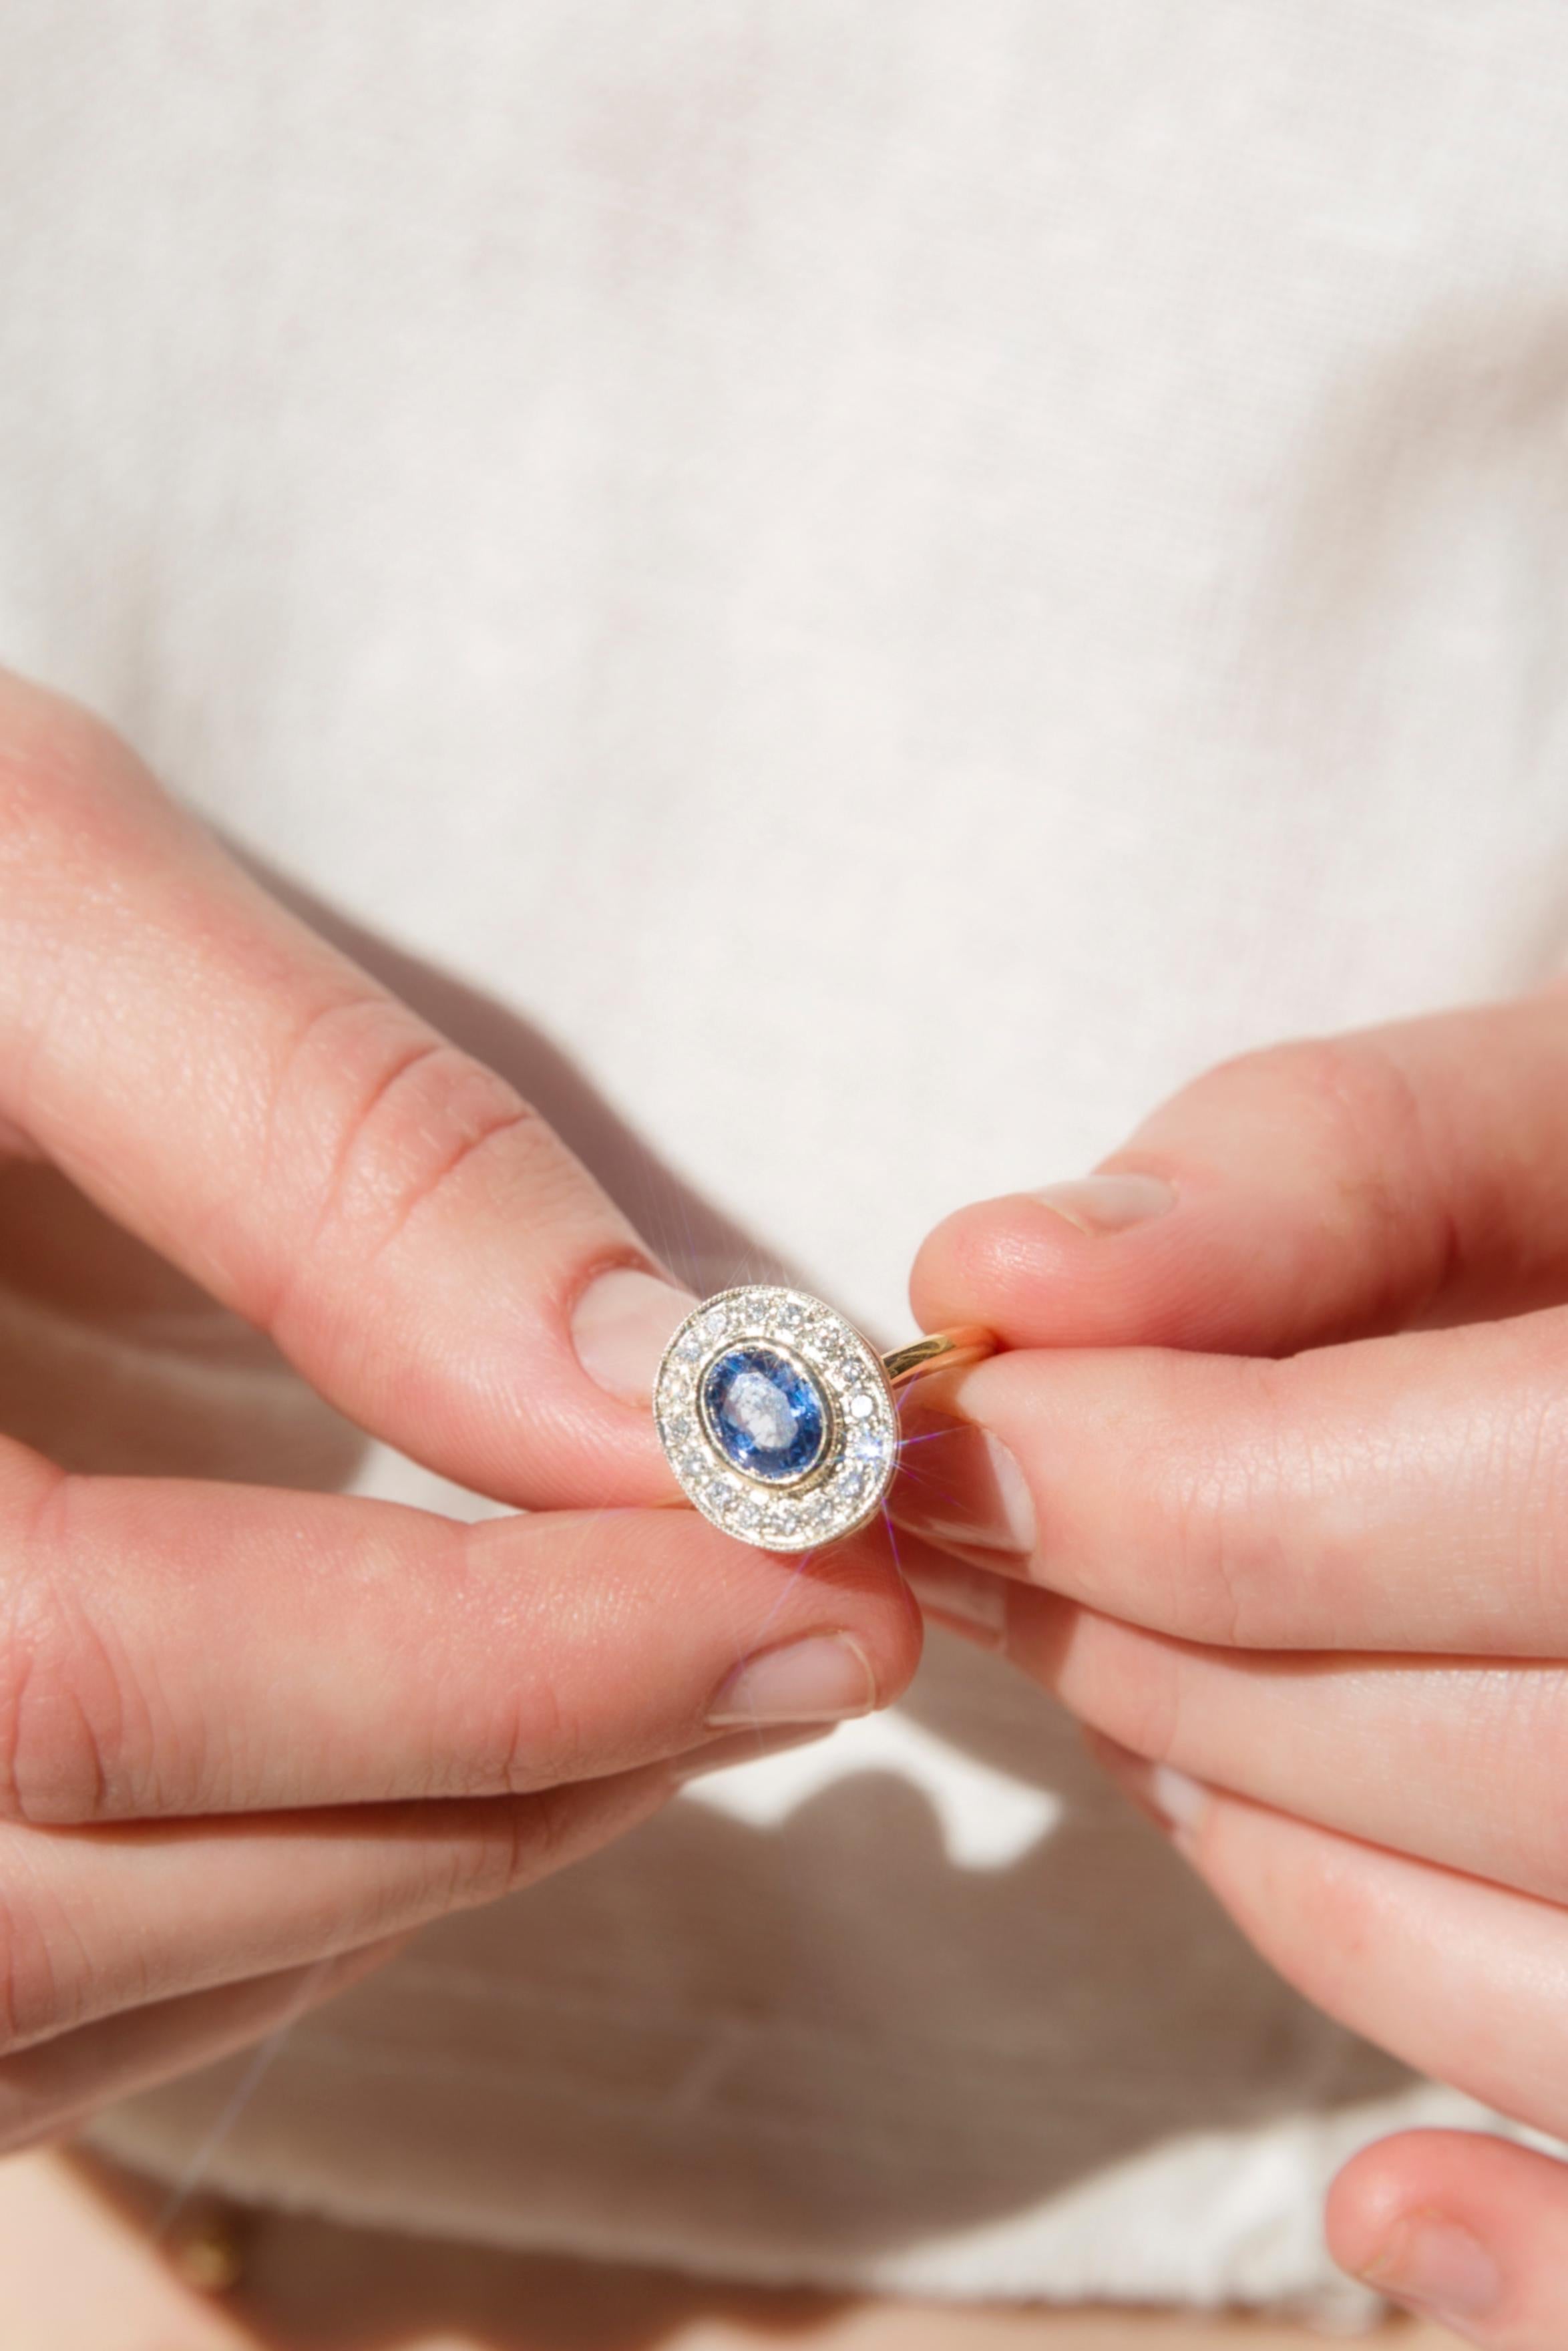 Lovingly reinvented in 18 carat yellow gold The Avril Ring holds a stunning oval bright blue Ceylon sapphire in the embrace of sparkling round brilliant cut diamonds. Raised to anticipate light dancing under and through the setting and worn to